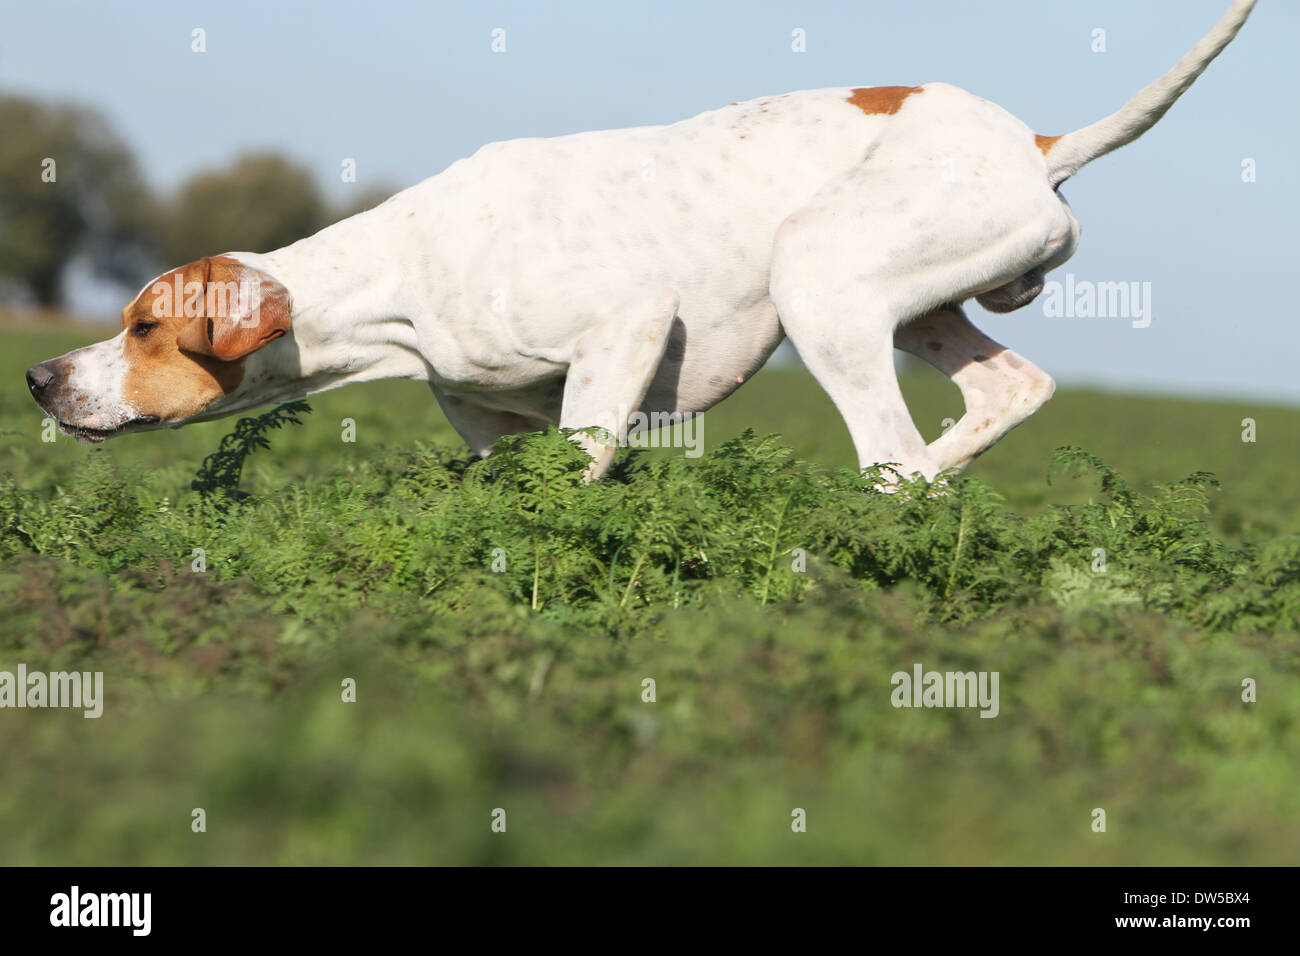 Dog English Pointer  /  adult running in a field Stock Photo